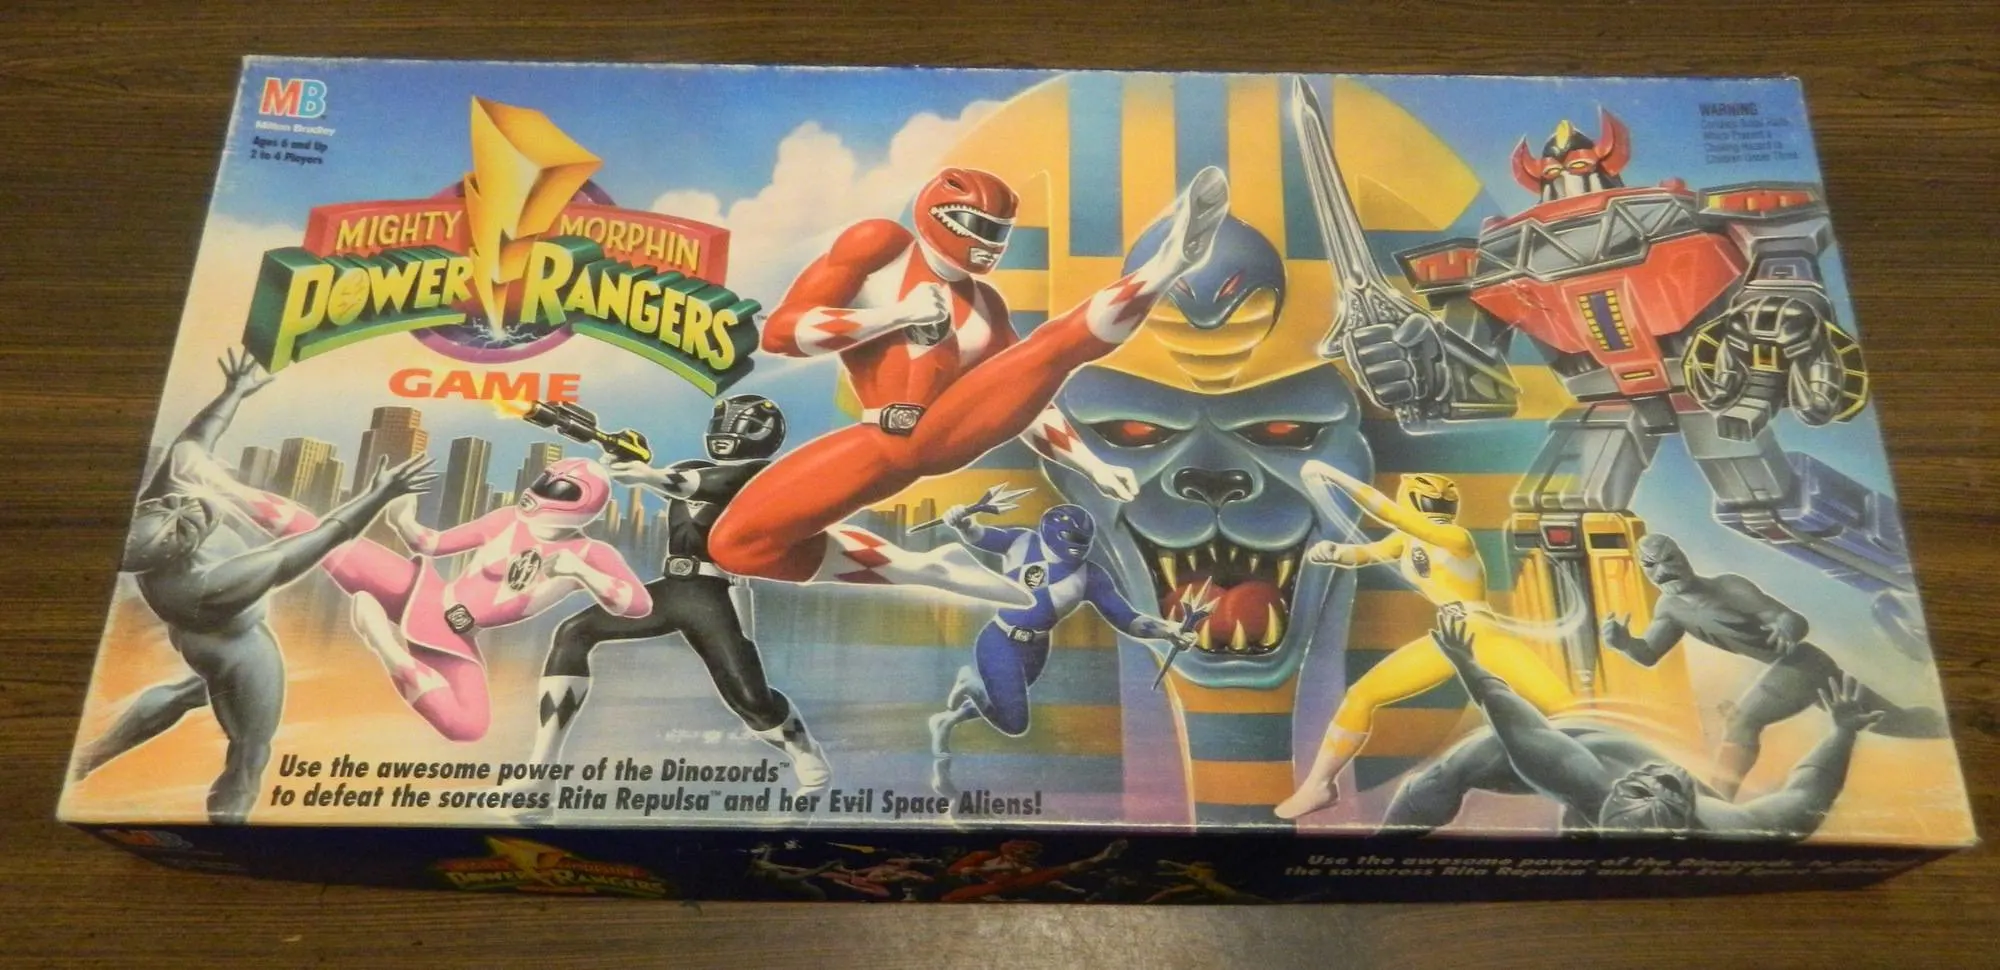 Box for Mighty Morphin Power Rangers Game